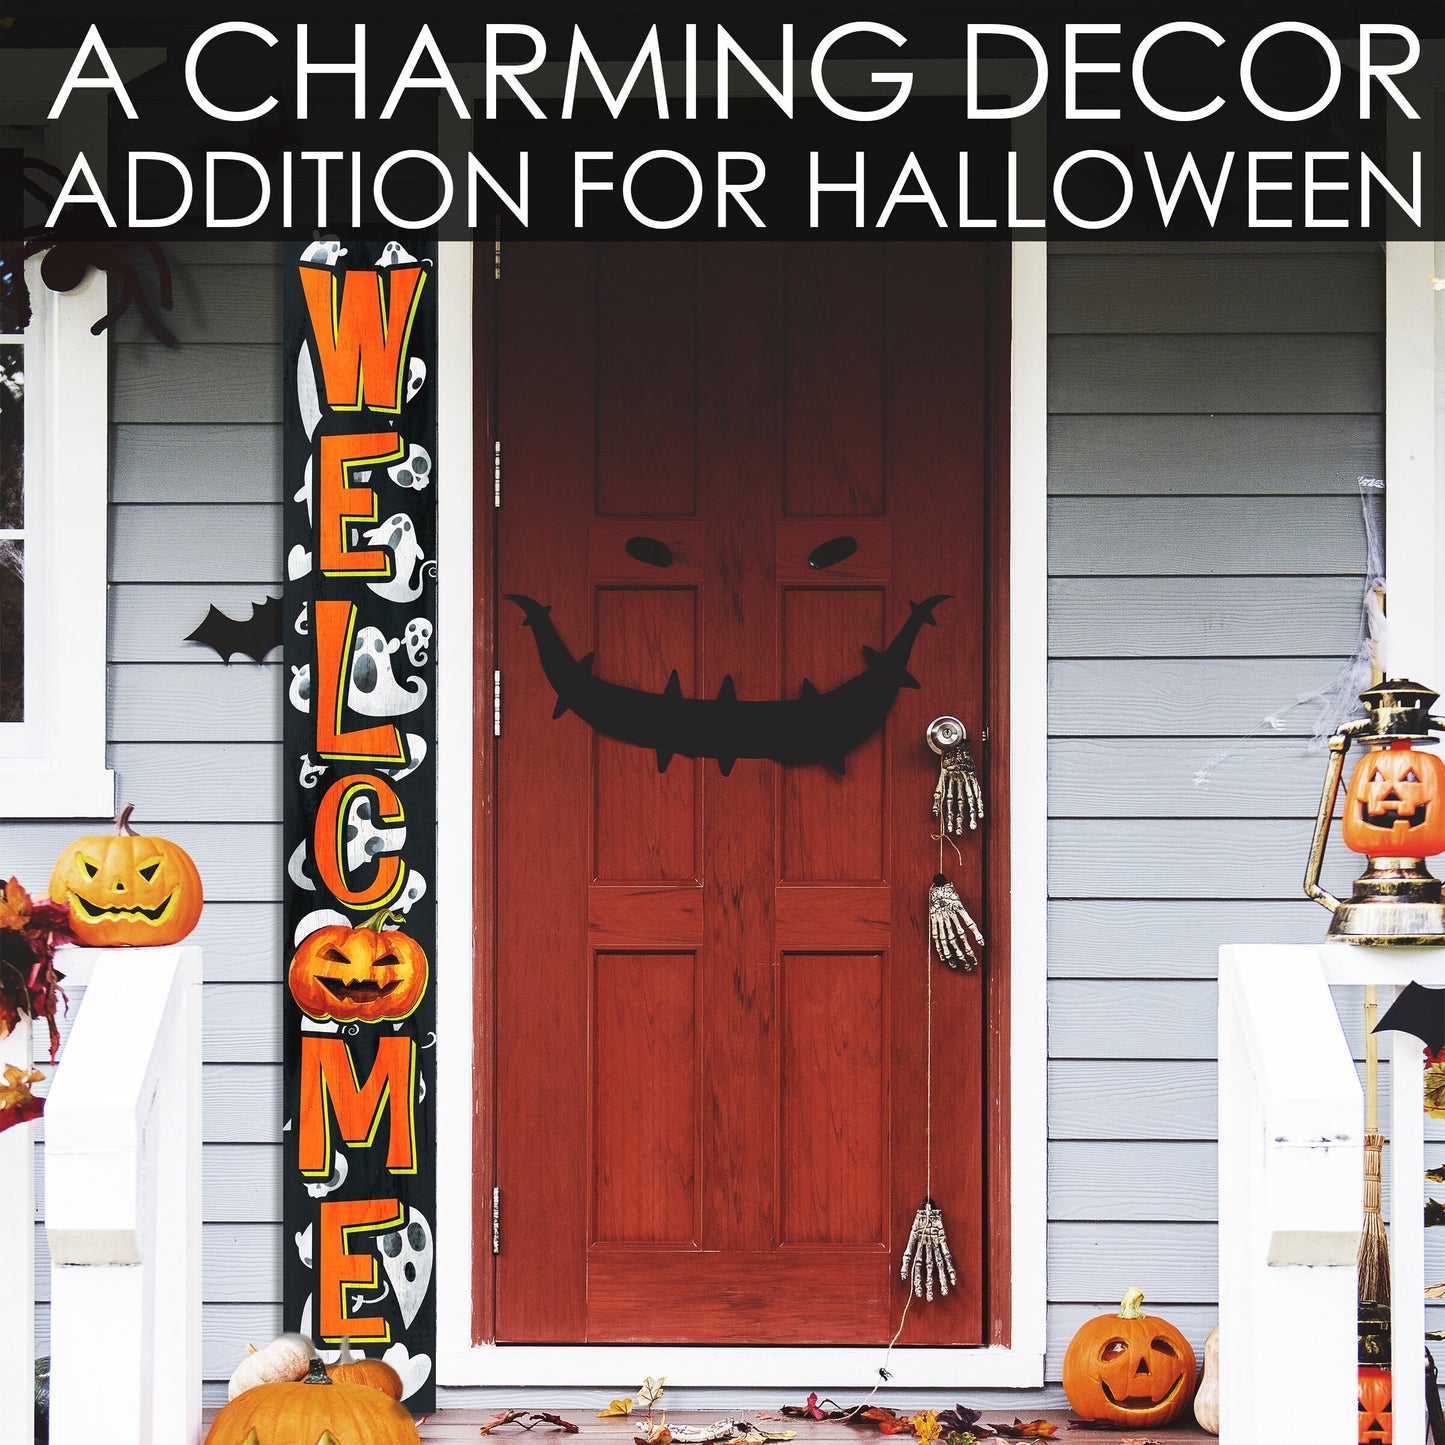 72-Inch Wooden Halloween Welcome Sign with Ghost Pattern and Jack O'Lantern - Spooky Front Door Decoration for Porch, Entryway